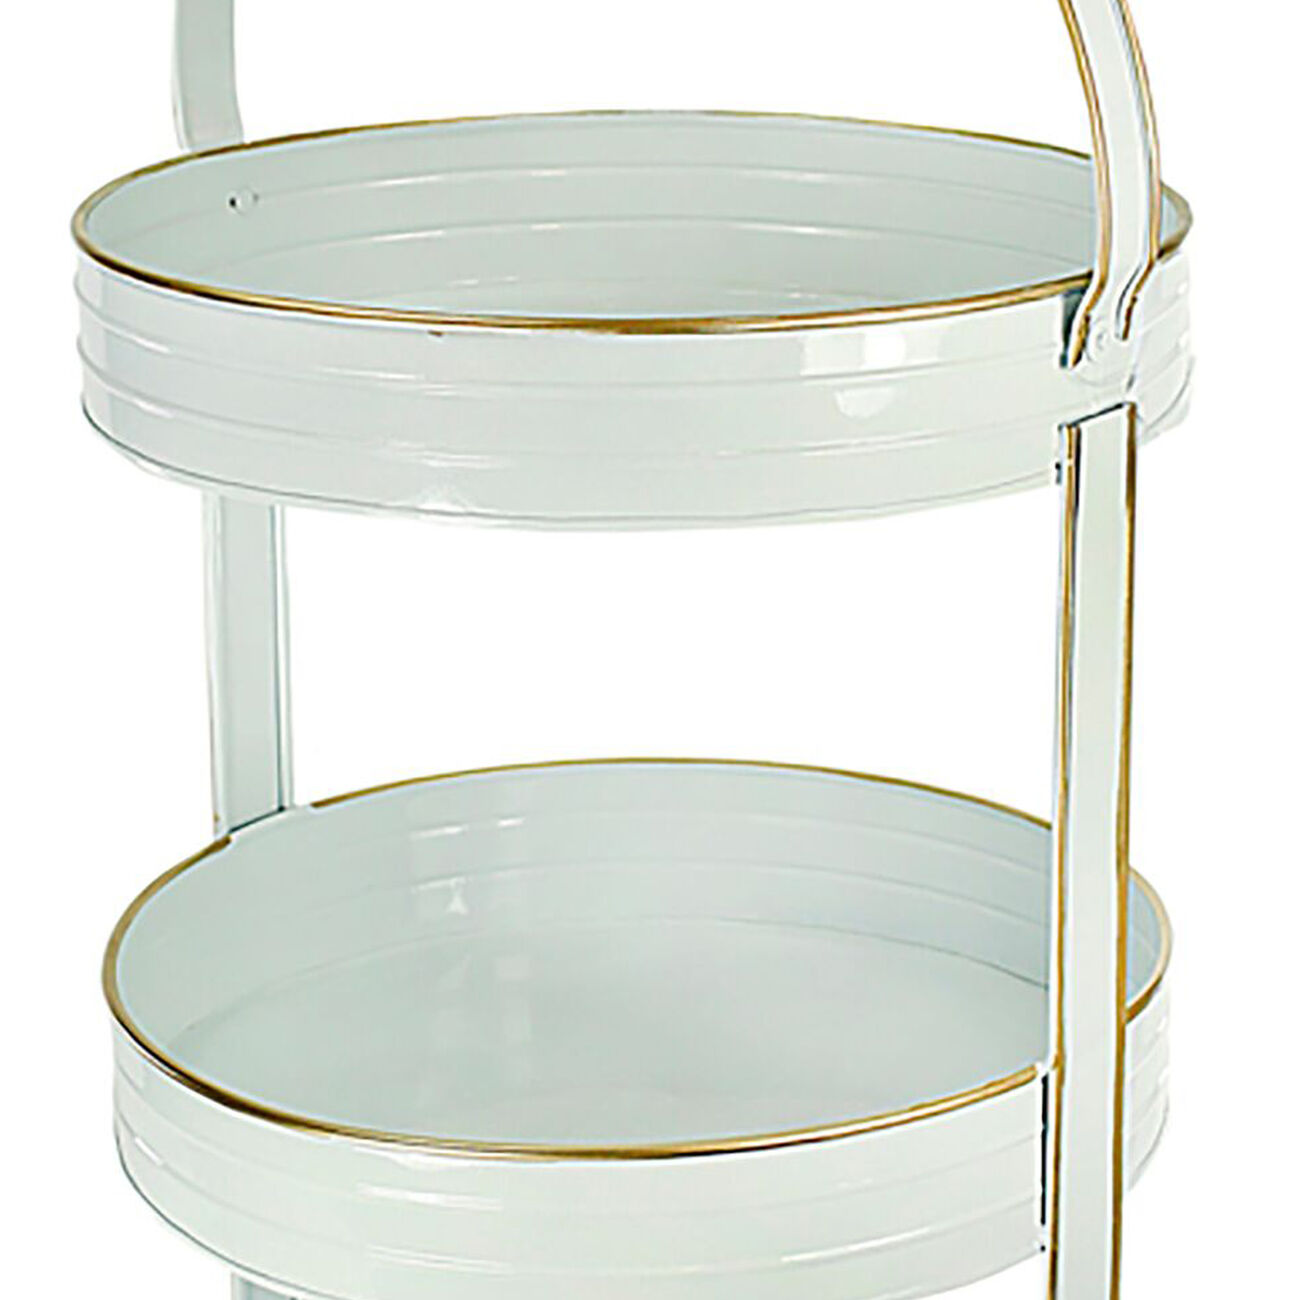 Round Metal 3 Tier Server Tray with Integrated Handle, White